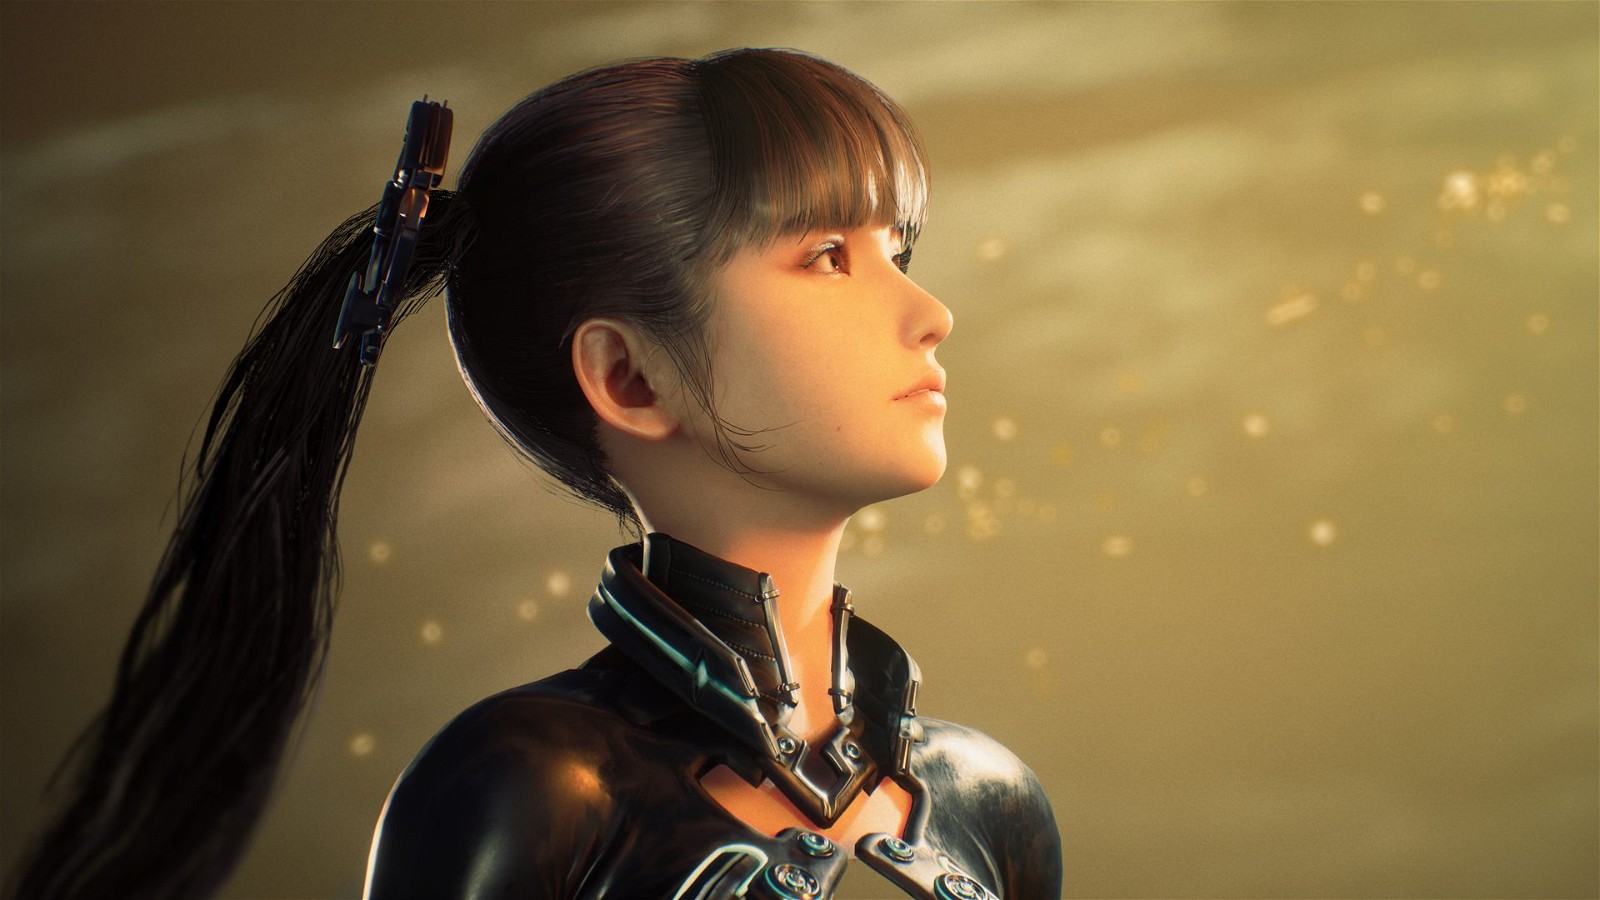 Shift Up's Stellar Blade has been criticized for its portrayal of the female lead character, Eve.